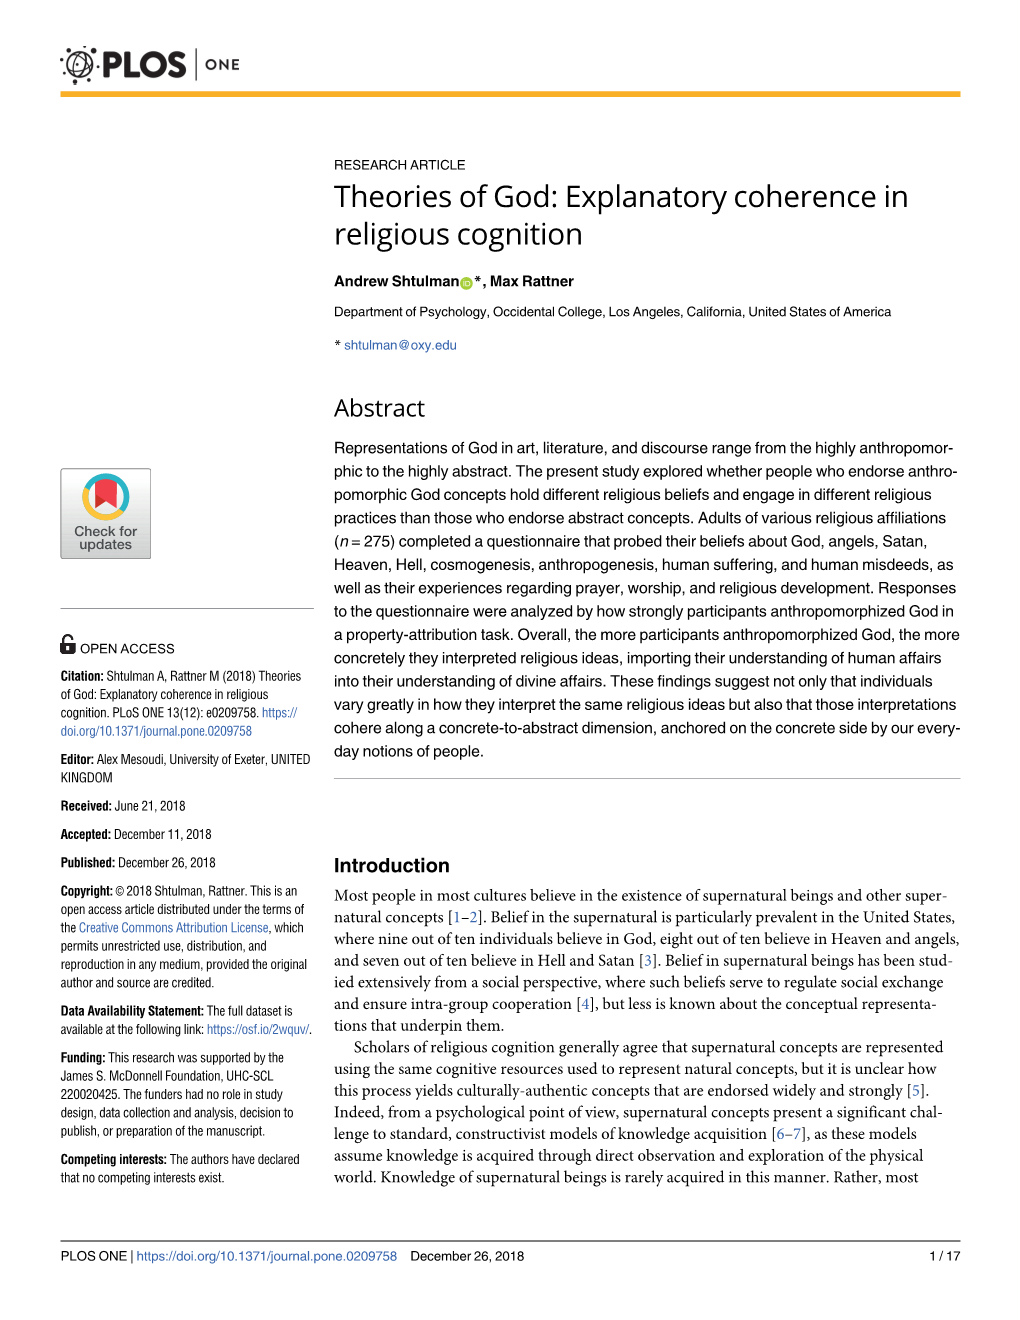 Theories of God: Explanatory Coherence in Religious Cognition